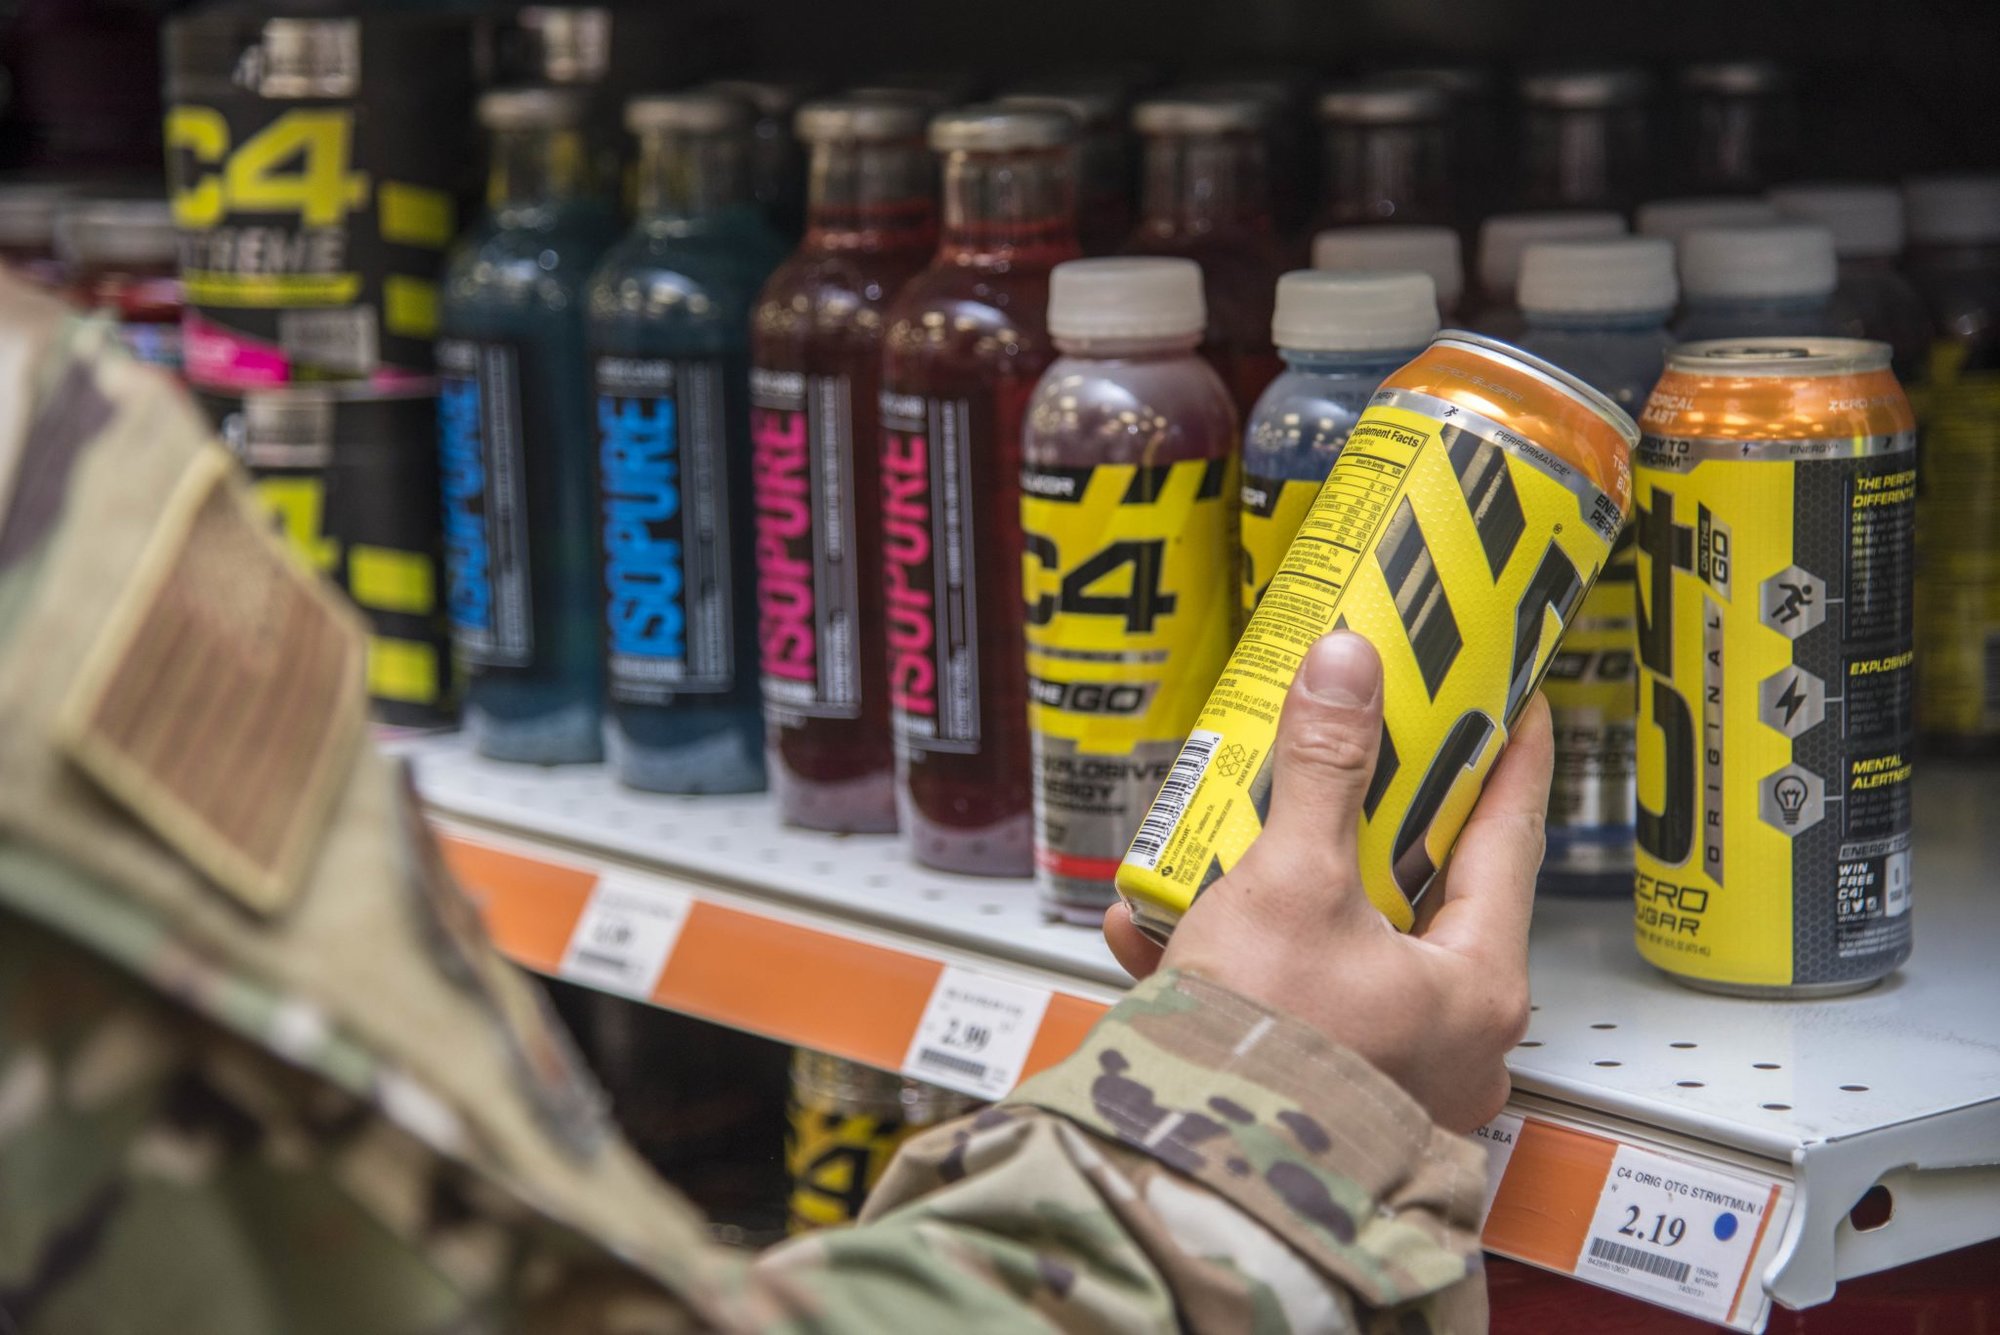 An Airman from Dover Air Force Base, Del., checks the label on a supplement, January 15, 2020. Service members should remain diligent and check labels on consumer products and follow official guidance on CBD products. (U.S. Air Force photo by Staff Sgt. Nicole Leidholm)